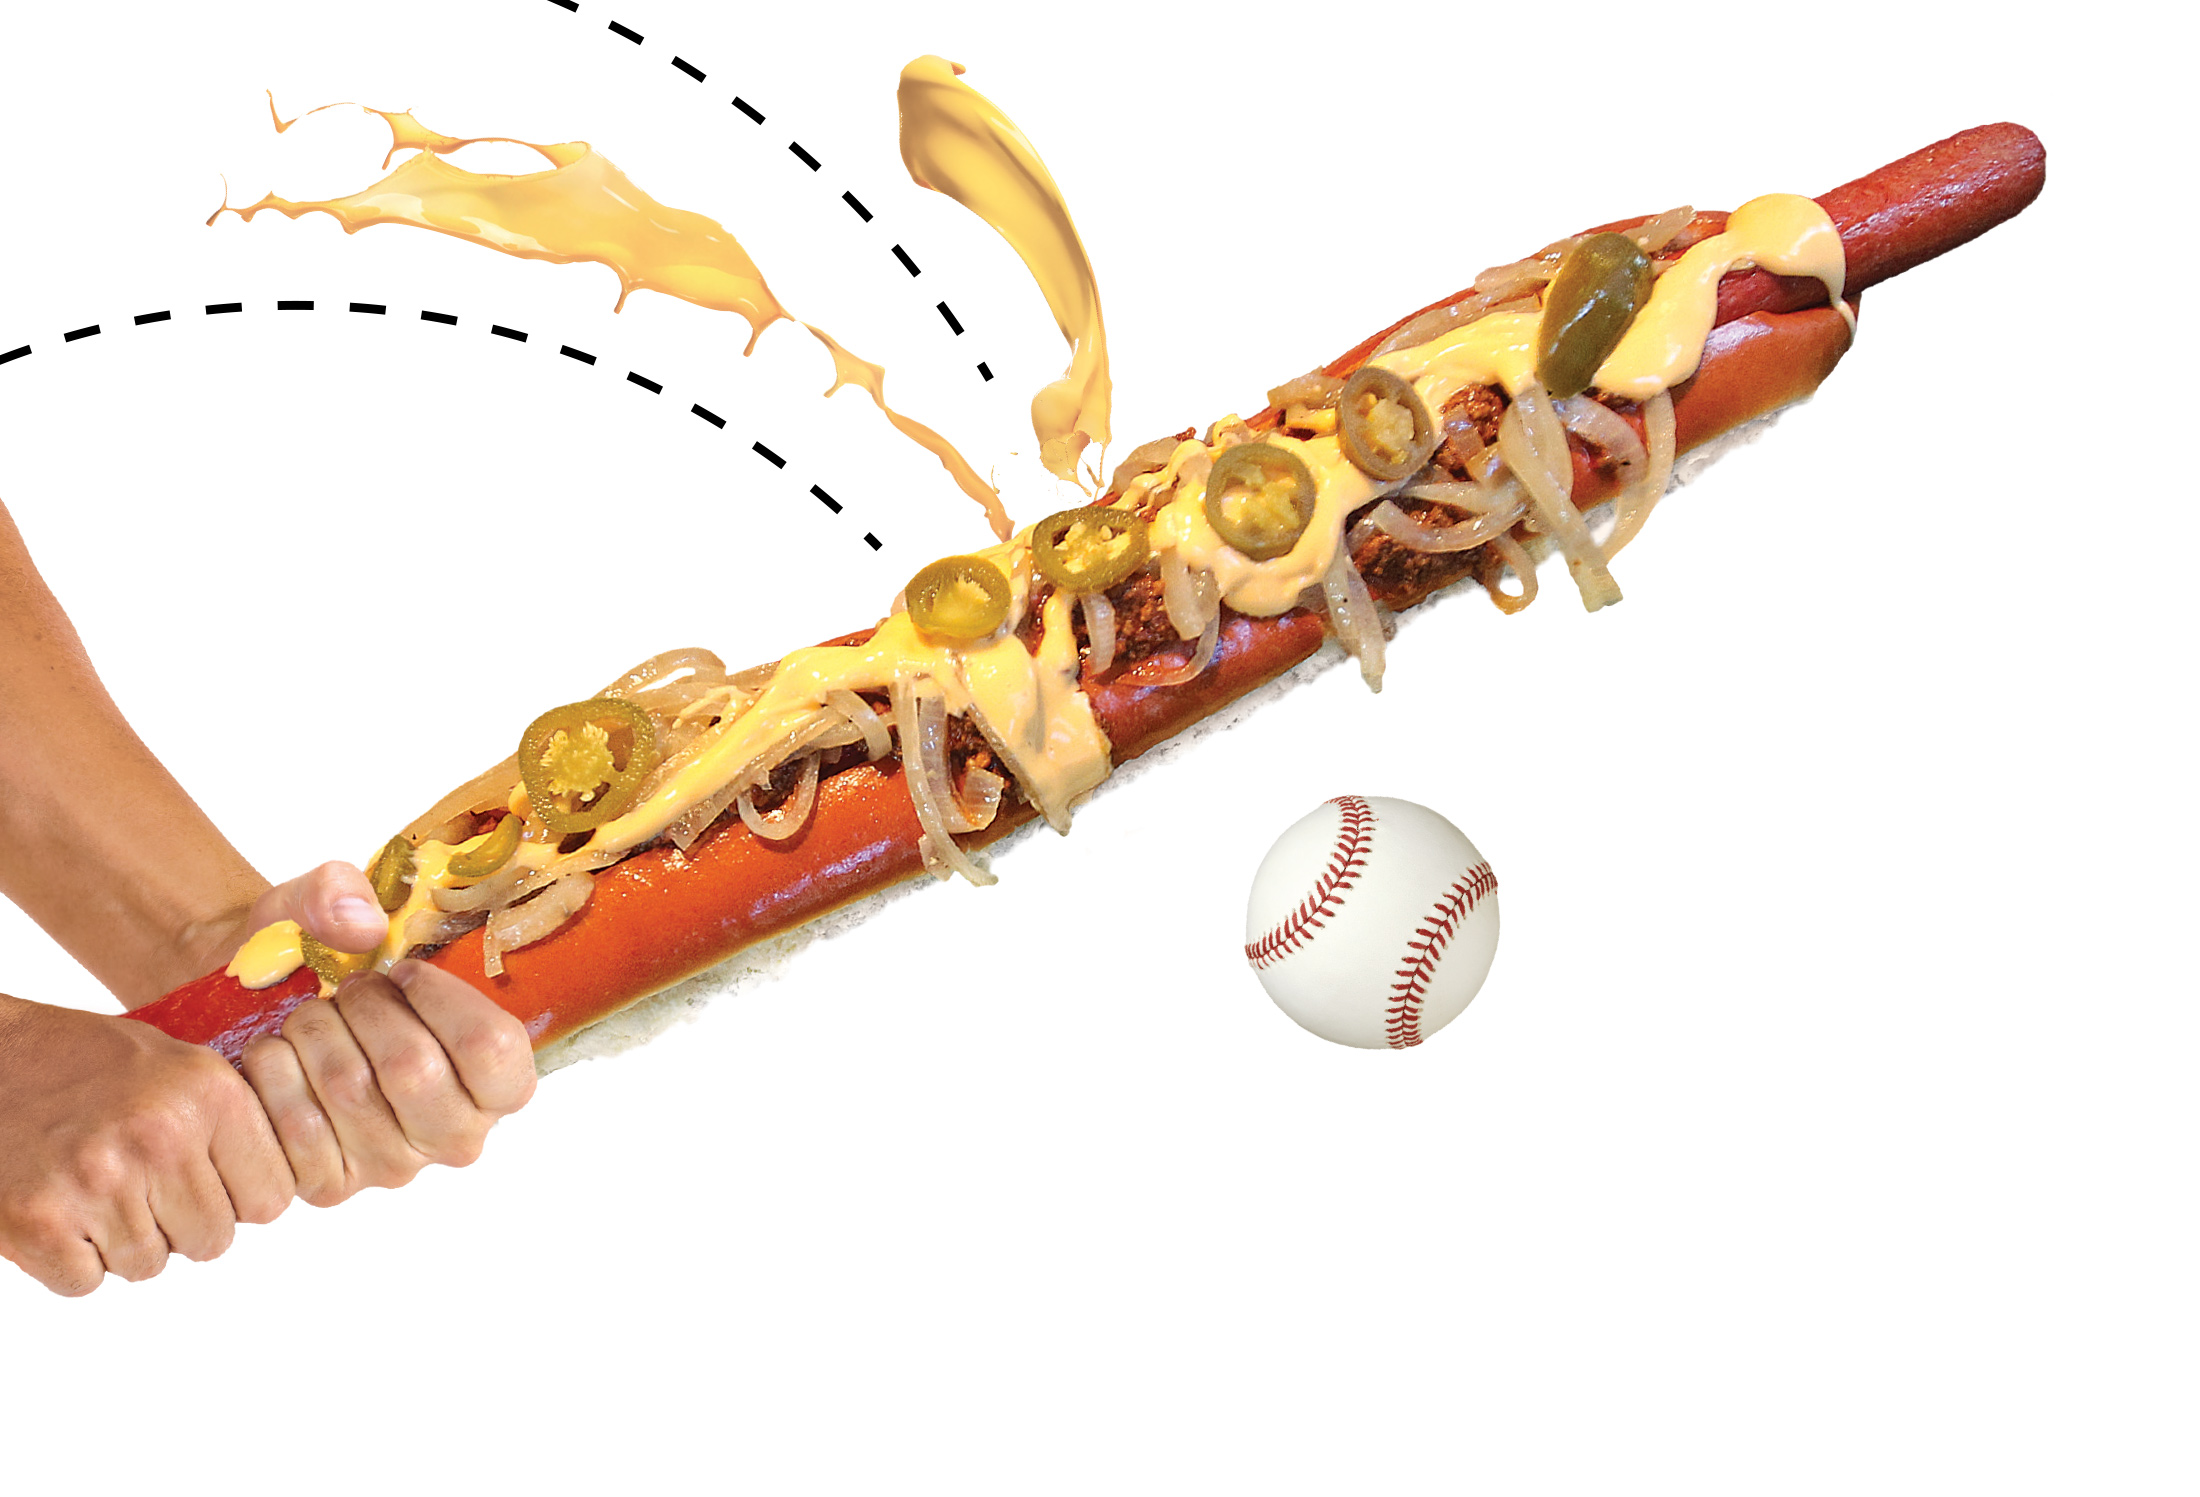 Ballparks Woo Fans With High-Calorie Food Creations - Bloomberg